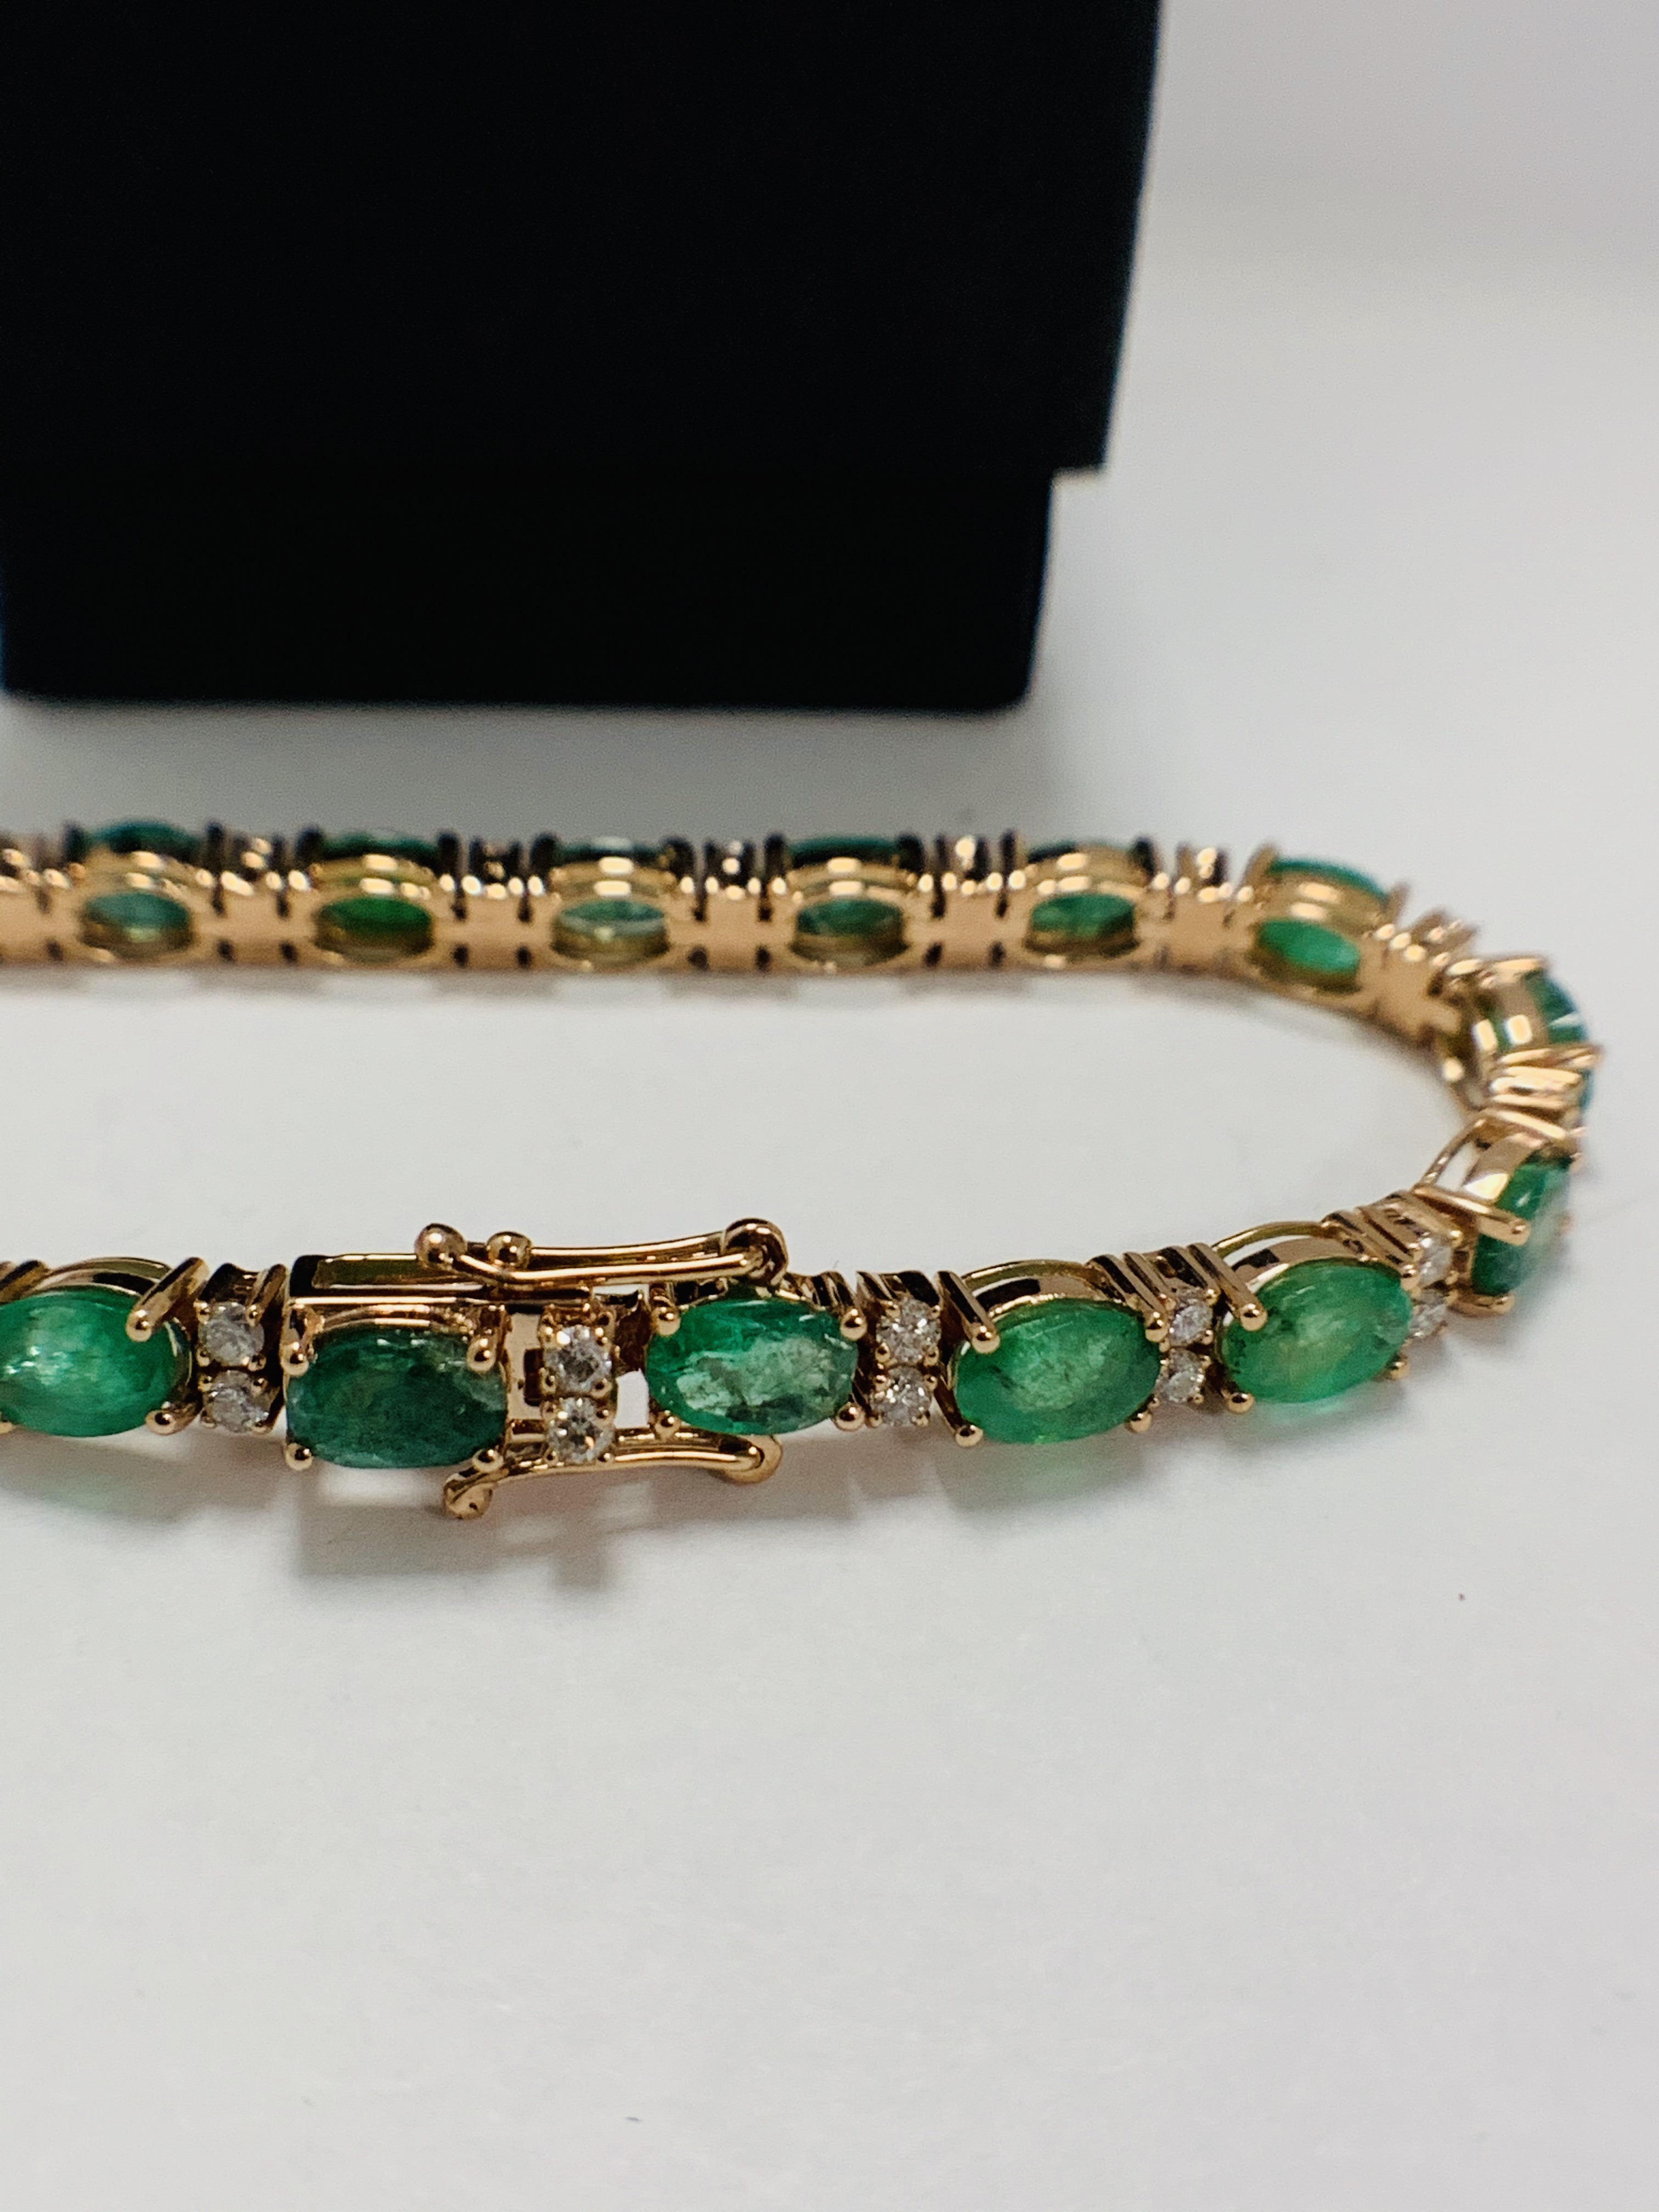 14ct Rose Gold Emerald and Diamond bracelet featuring, 21 oval cut, light green Emeralds (9.03ct TSW - Image 5 of 19